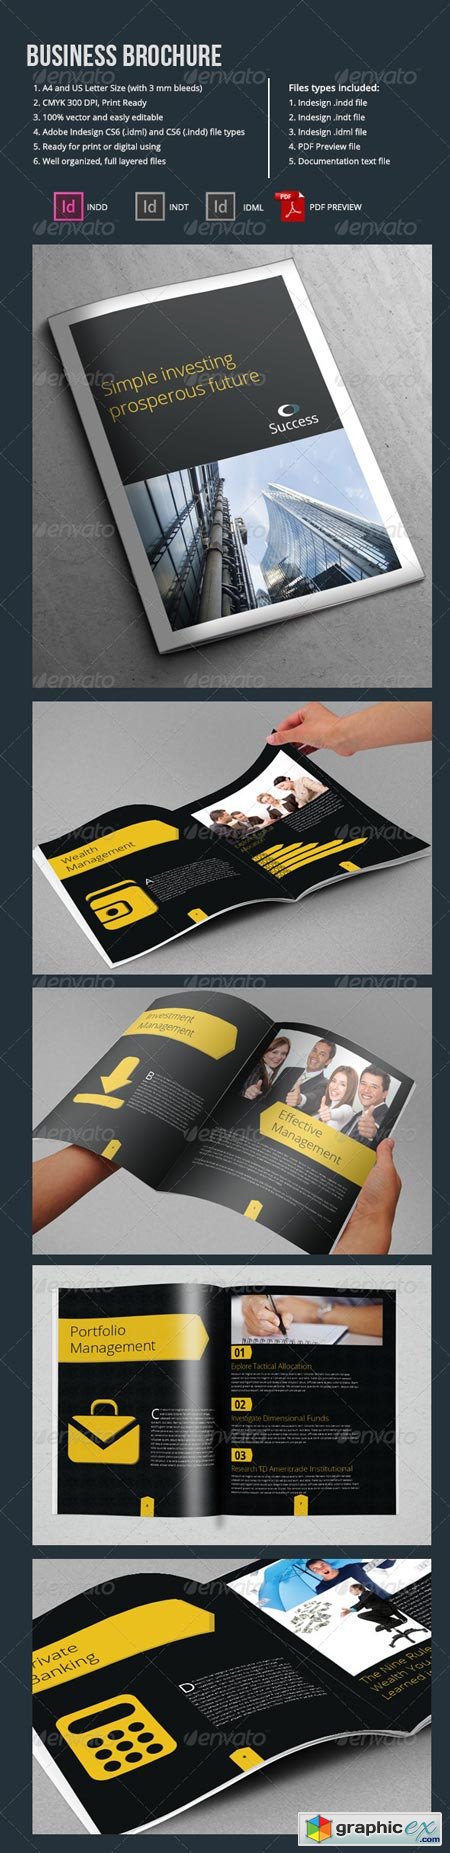 A4 Business Brochure Template 10 Pages 6791489